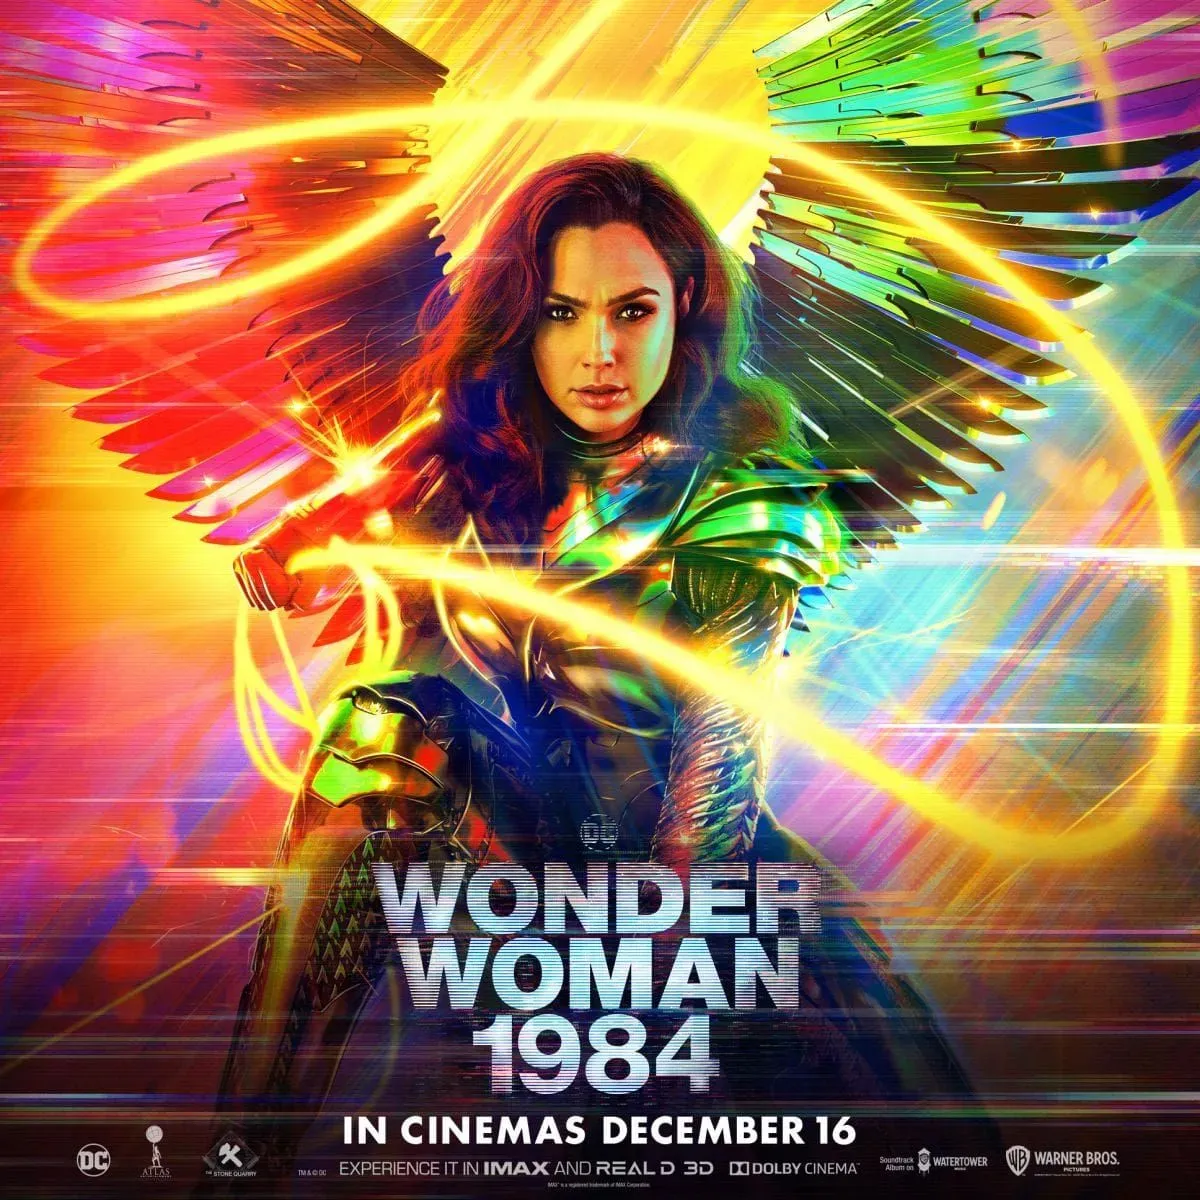 Gal Gadot on the poster for Wonder Woman 1984.